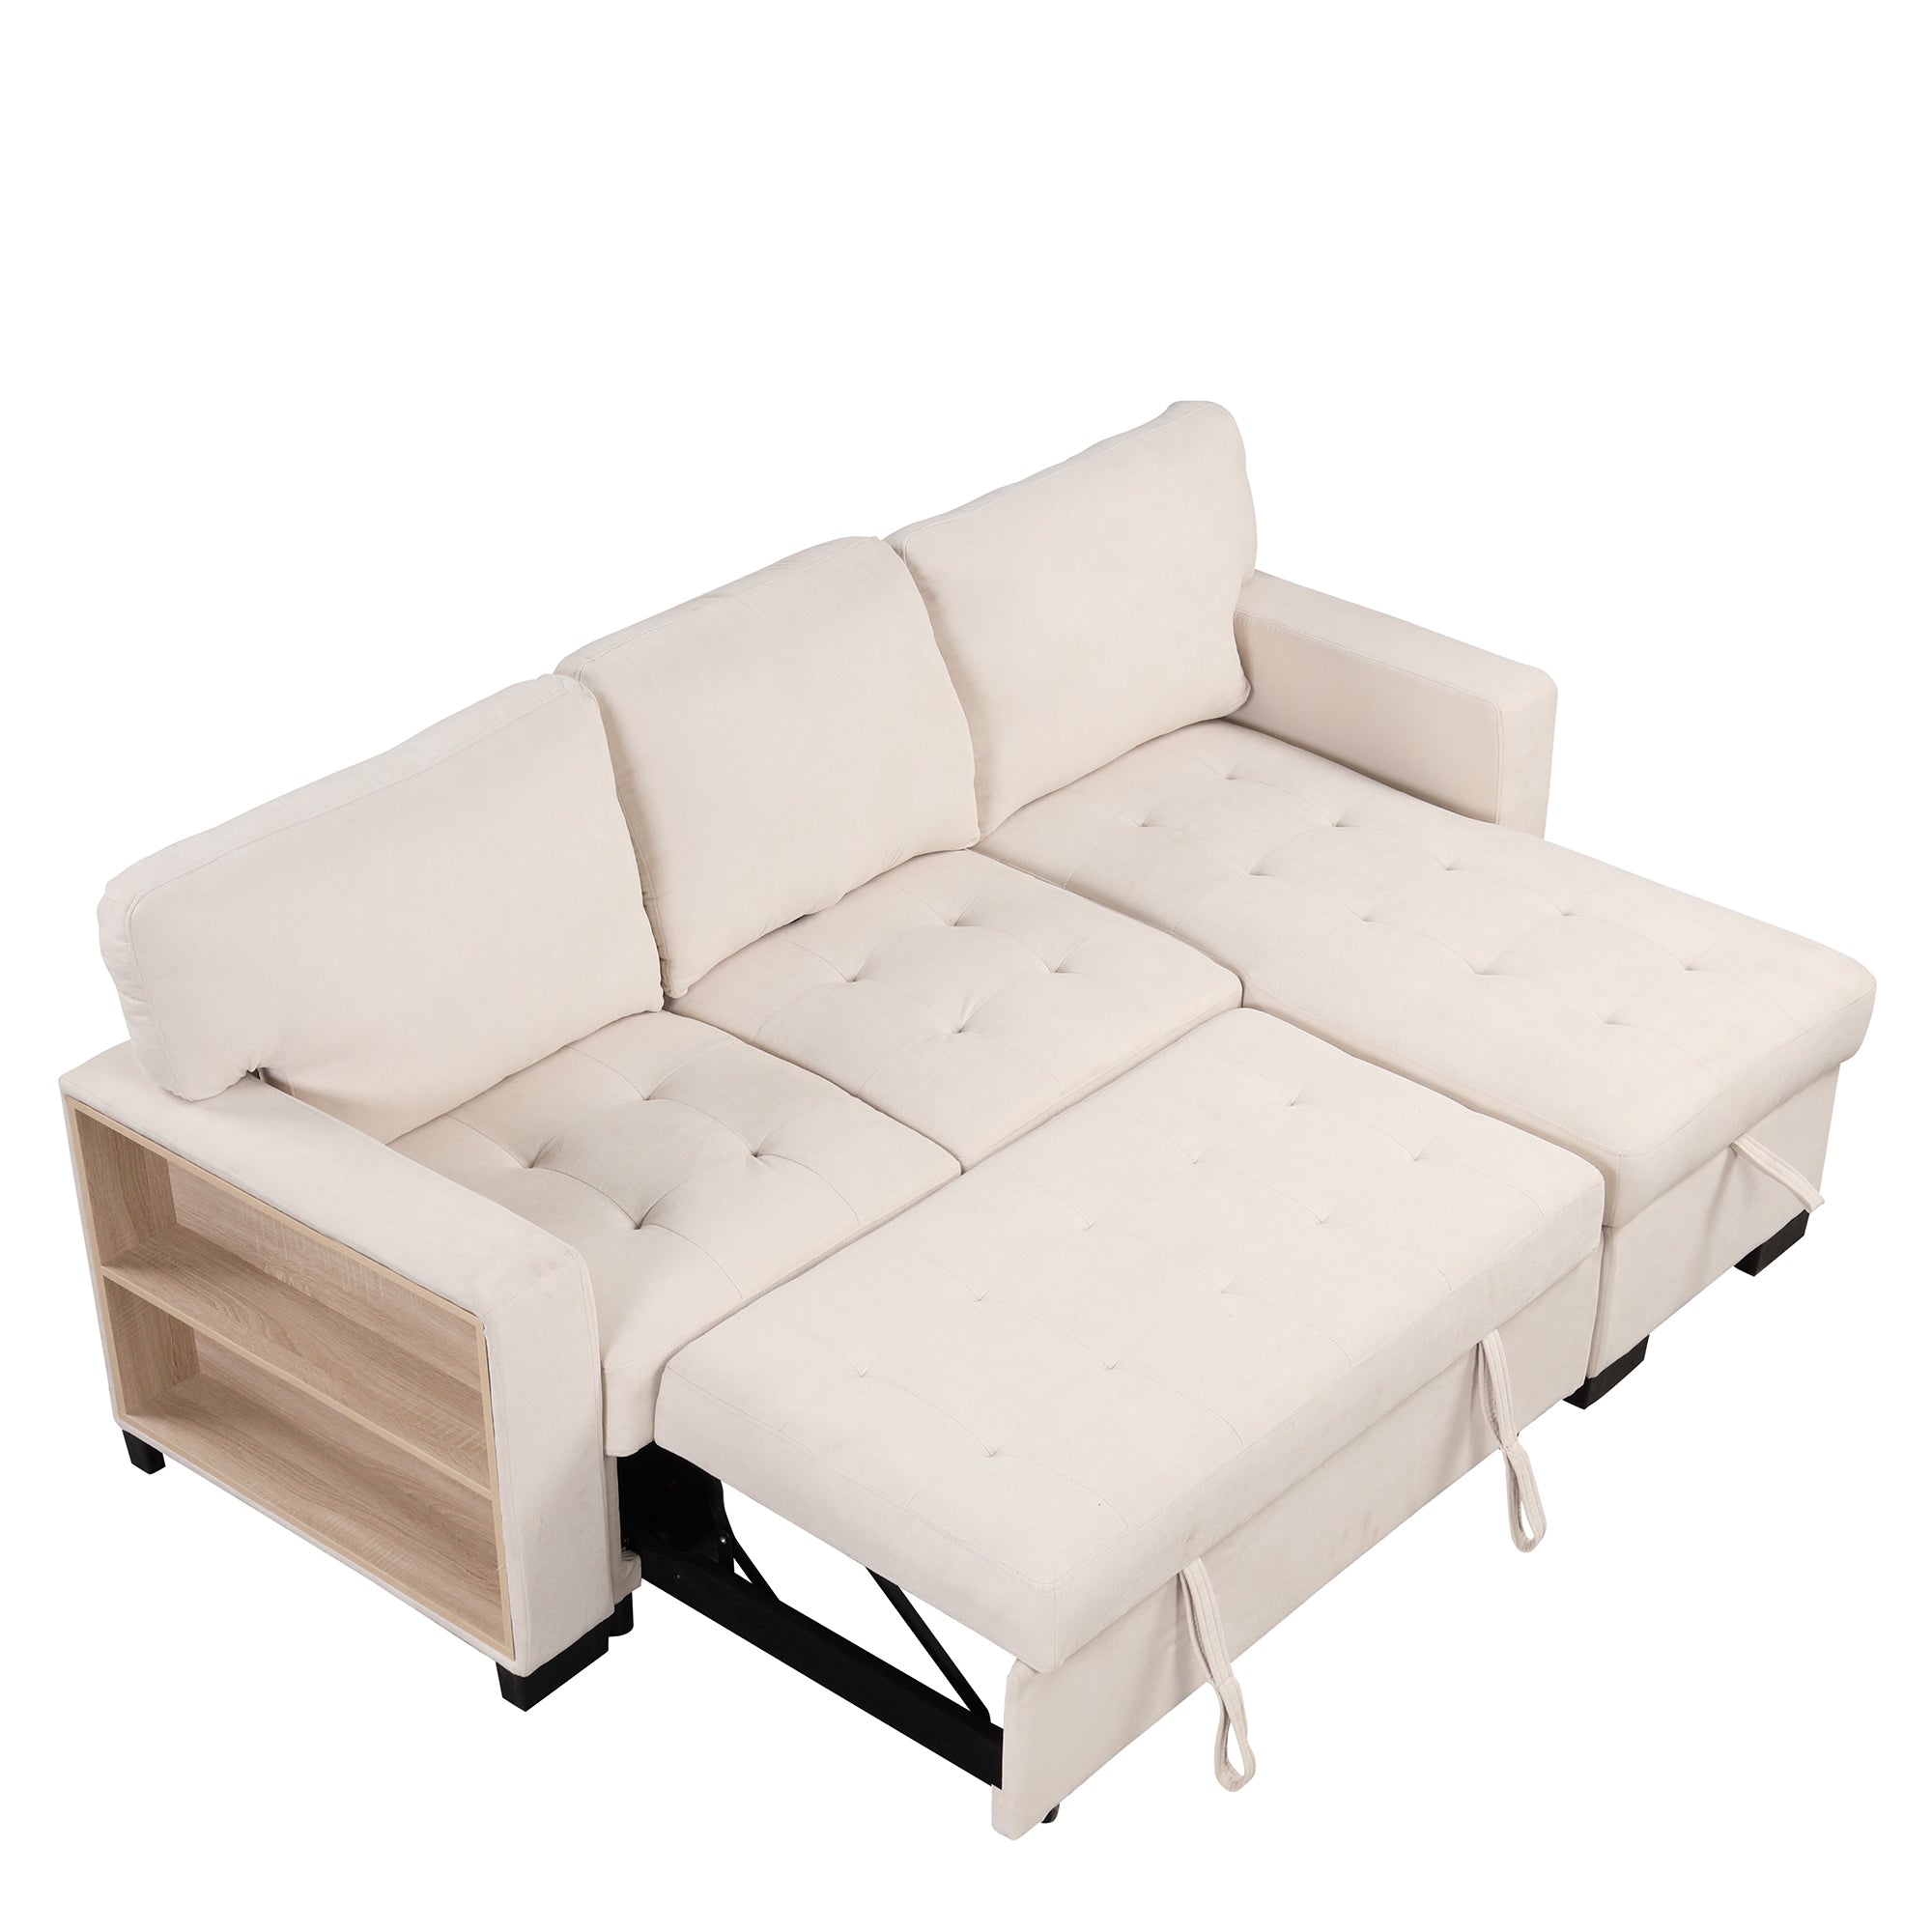 Beige Sectional Sofa Beige | Storage, Pull-Out Bed, USB-Sleeper Sectionals-American Furniture Outlet